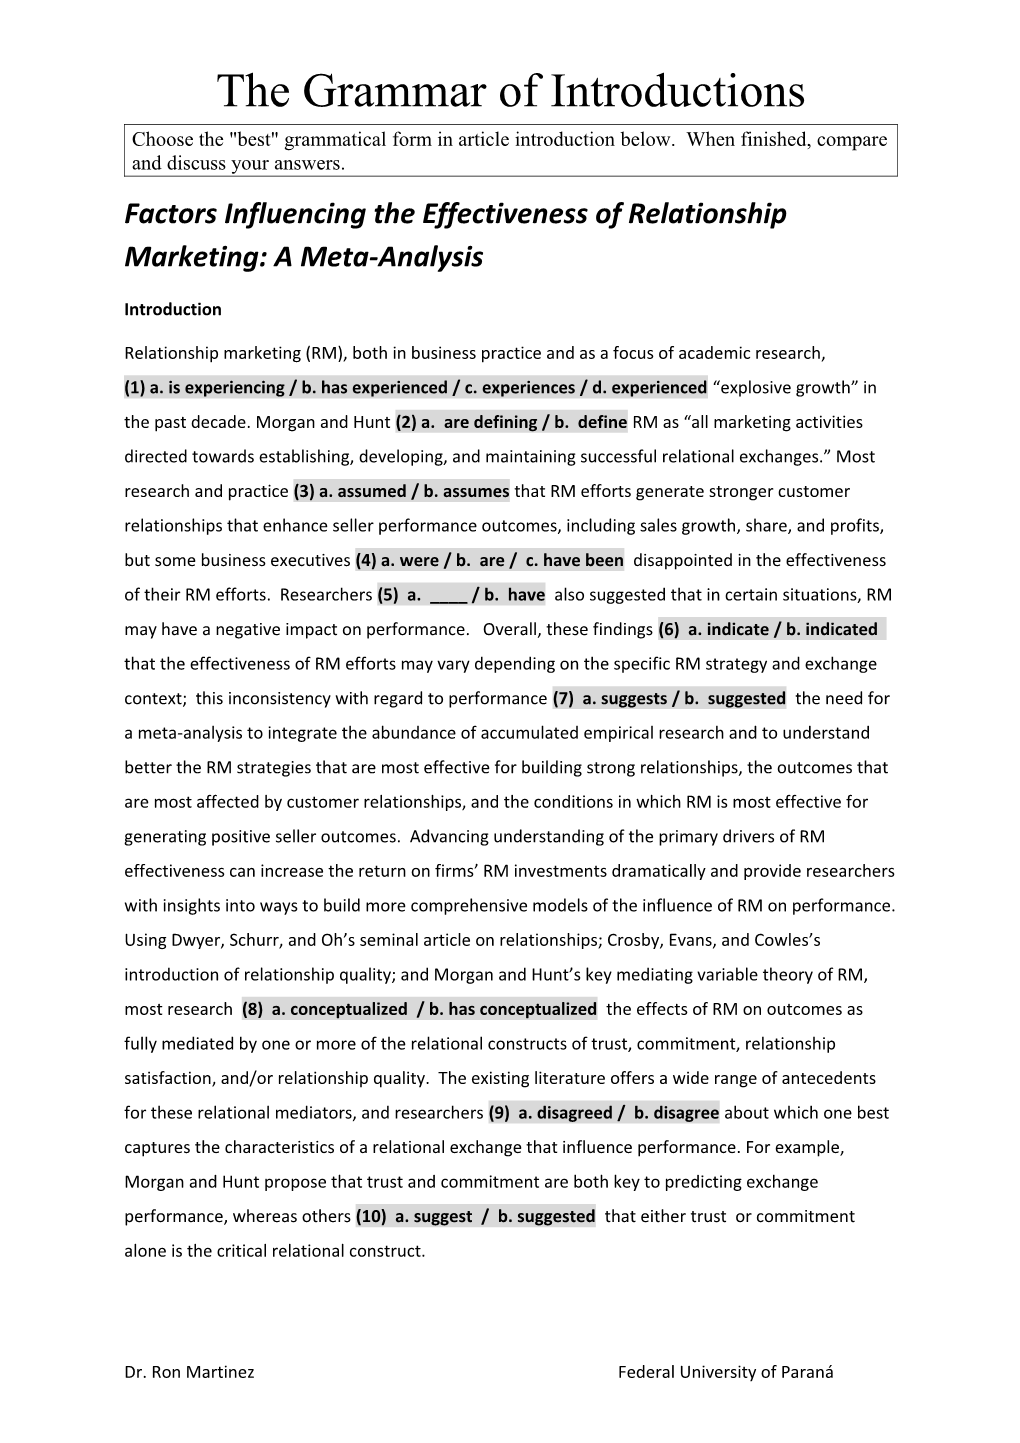 Factors Influencing the Effectiveness of Relationship Marketing: a Meta-Analysis